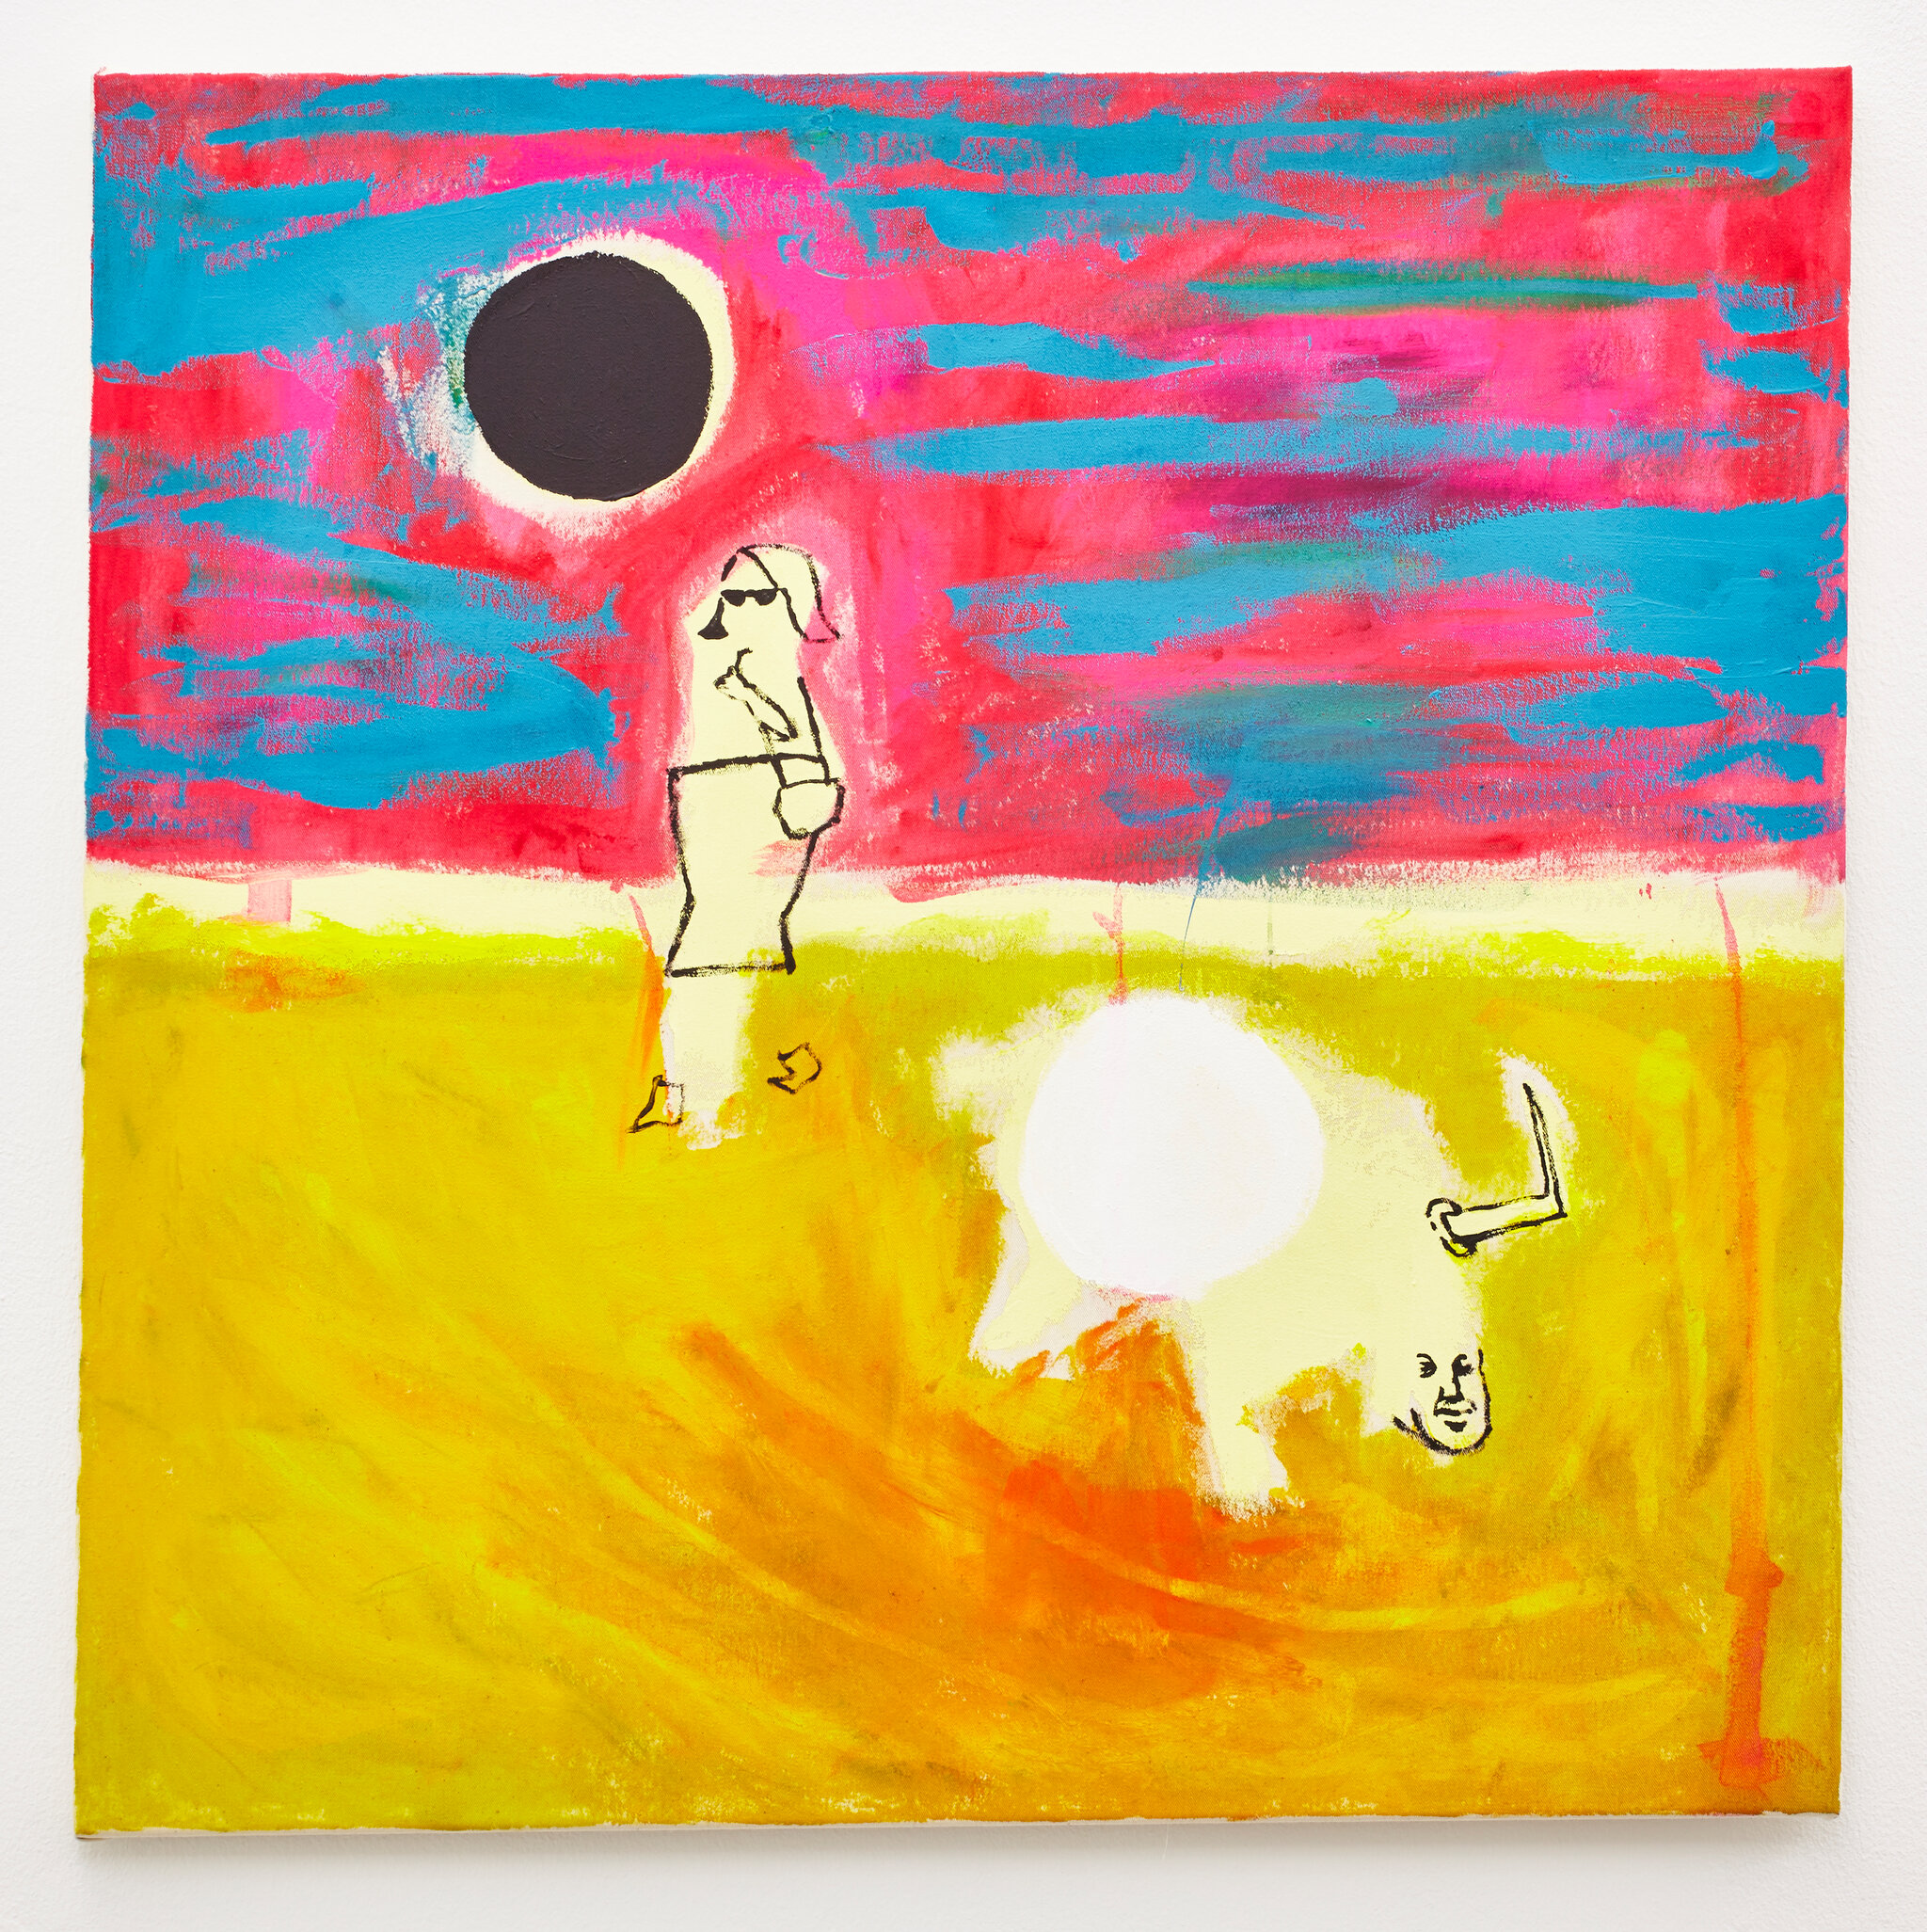 Select Works from "Pink Pony, Yellow Room"